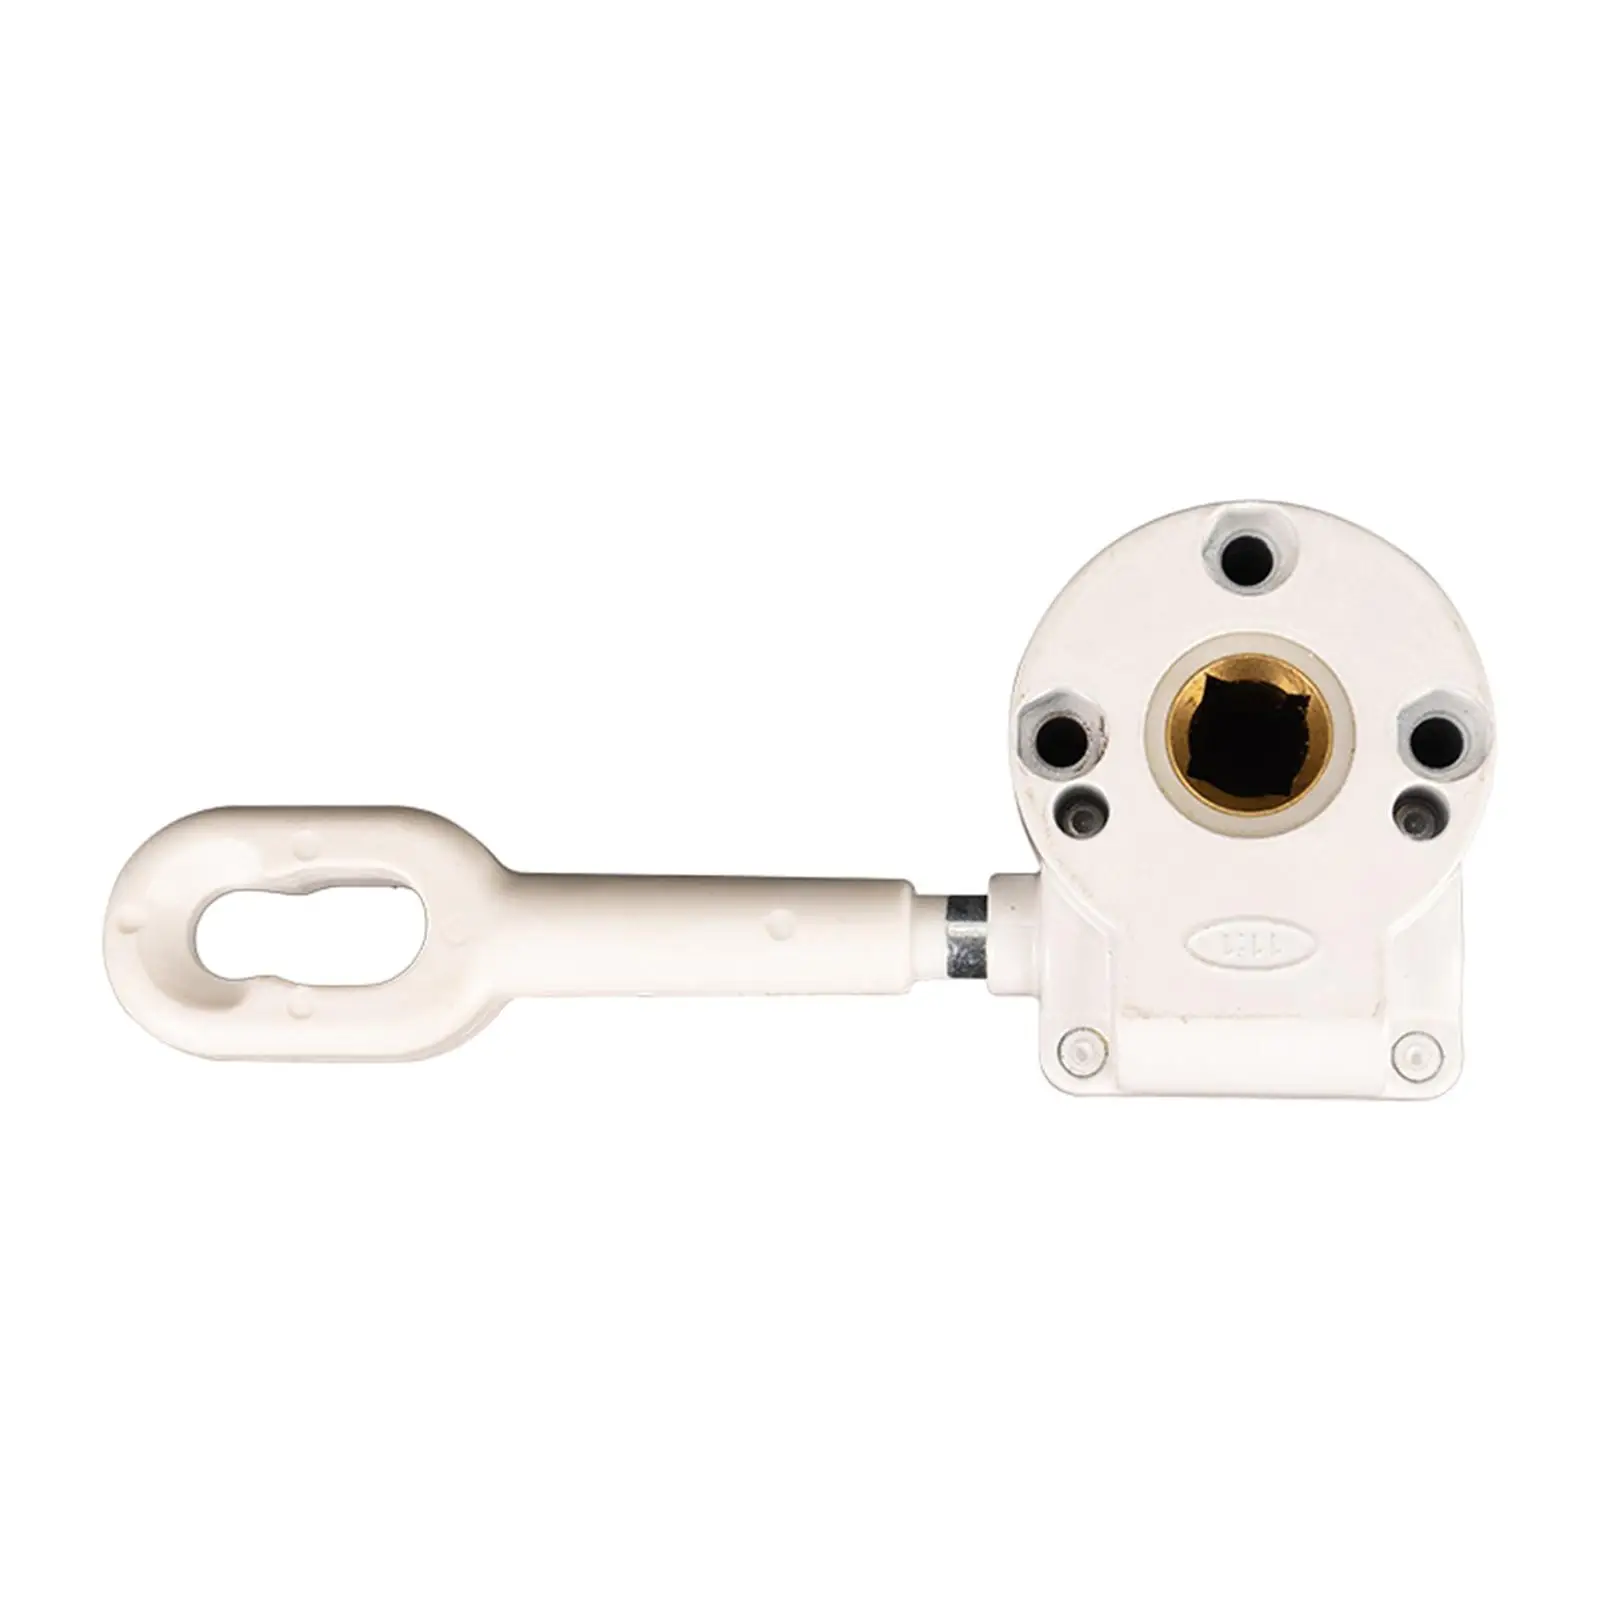 Outdoor Awning Crank Gearbox Easily Install Lightweight Hardware Parts